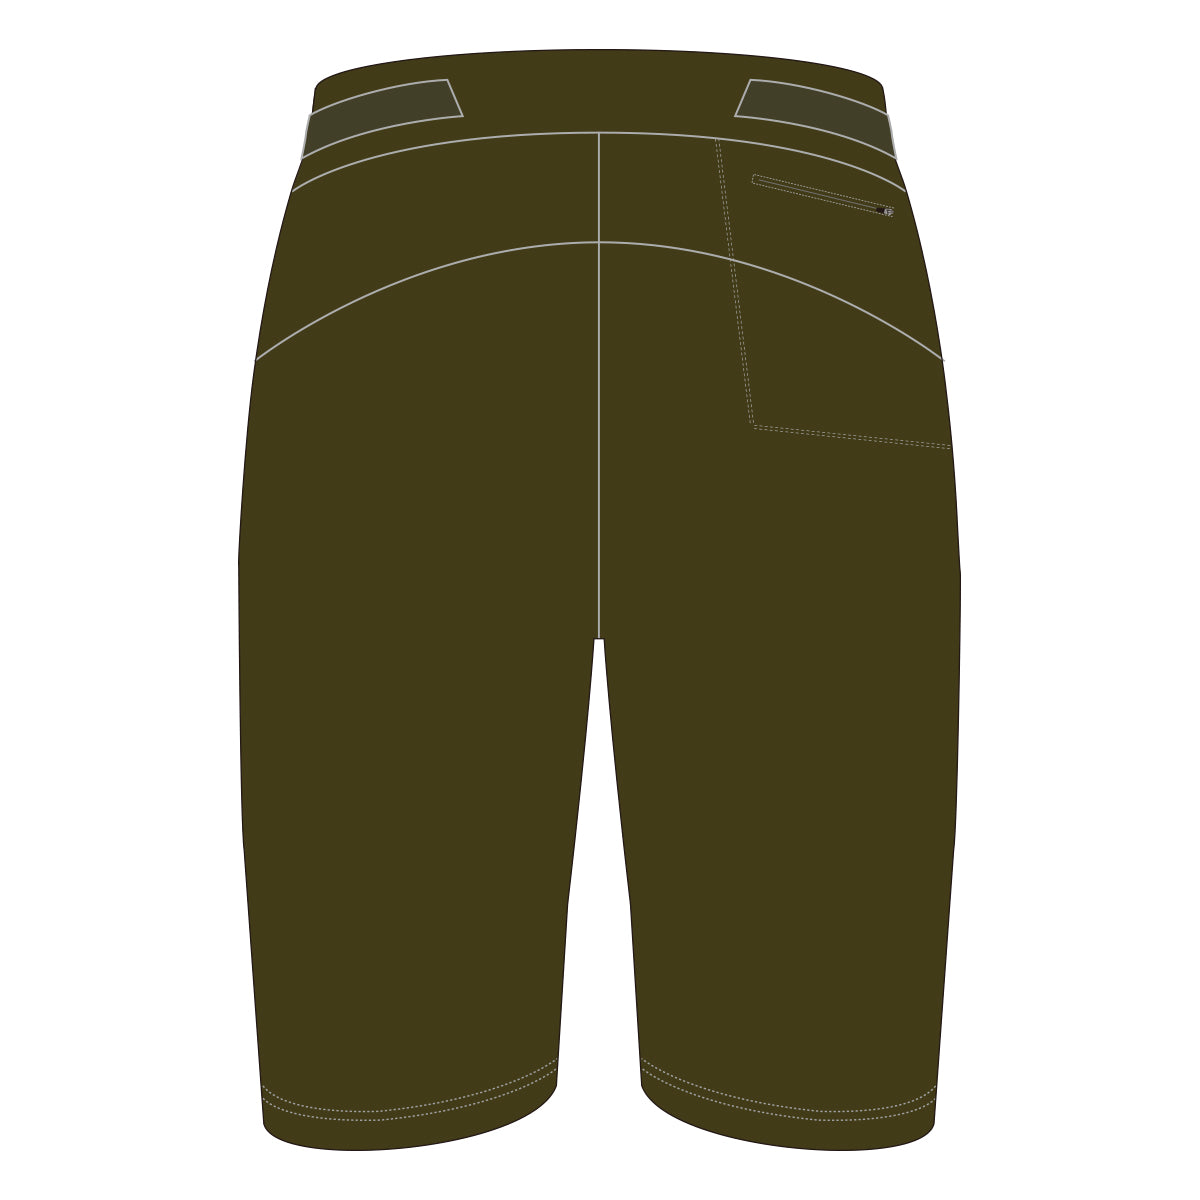 Linked Cycling Olive Baggy Shorts